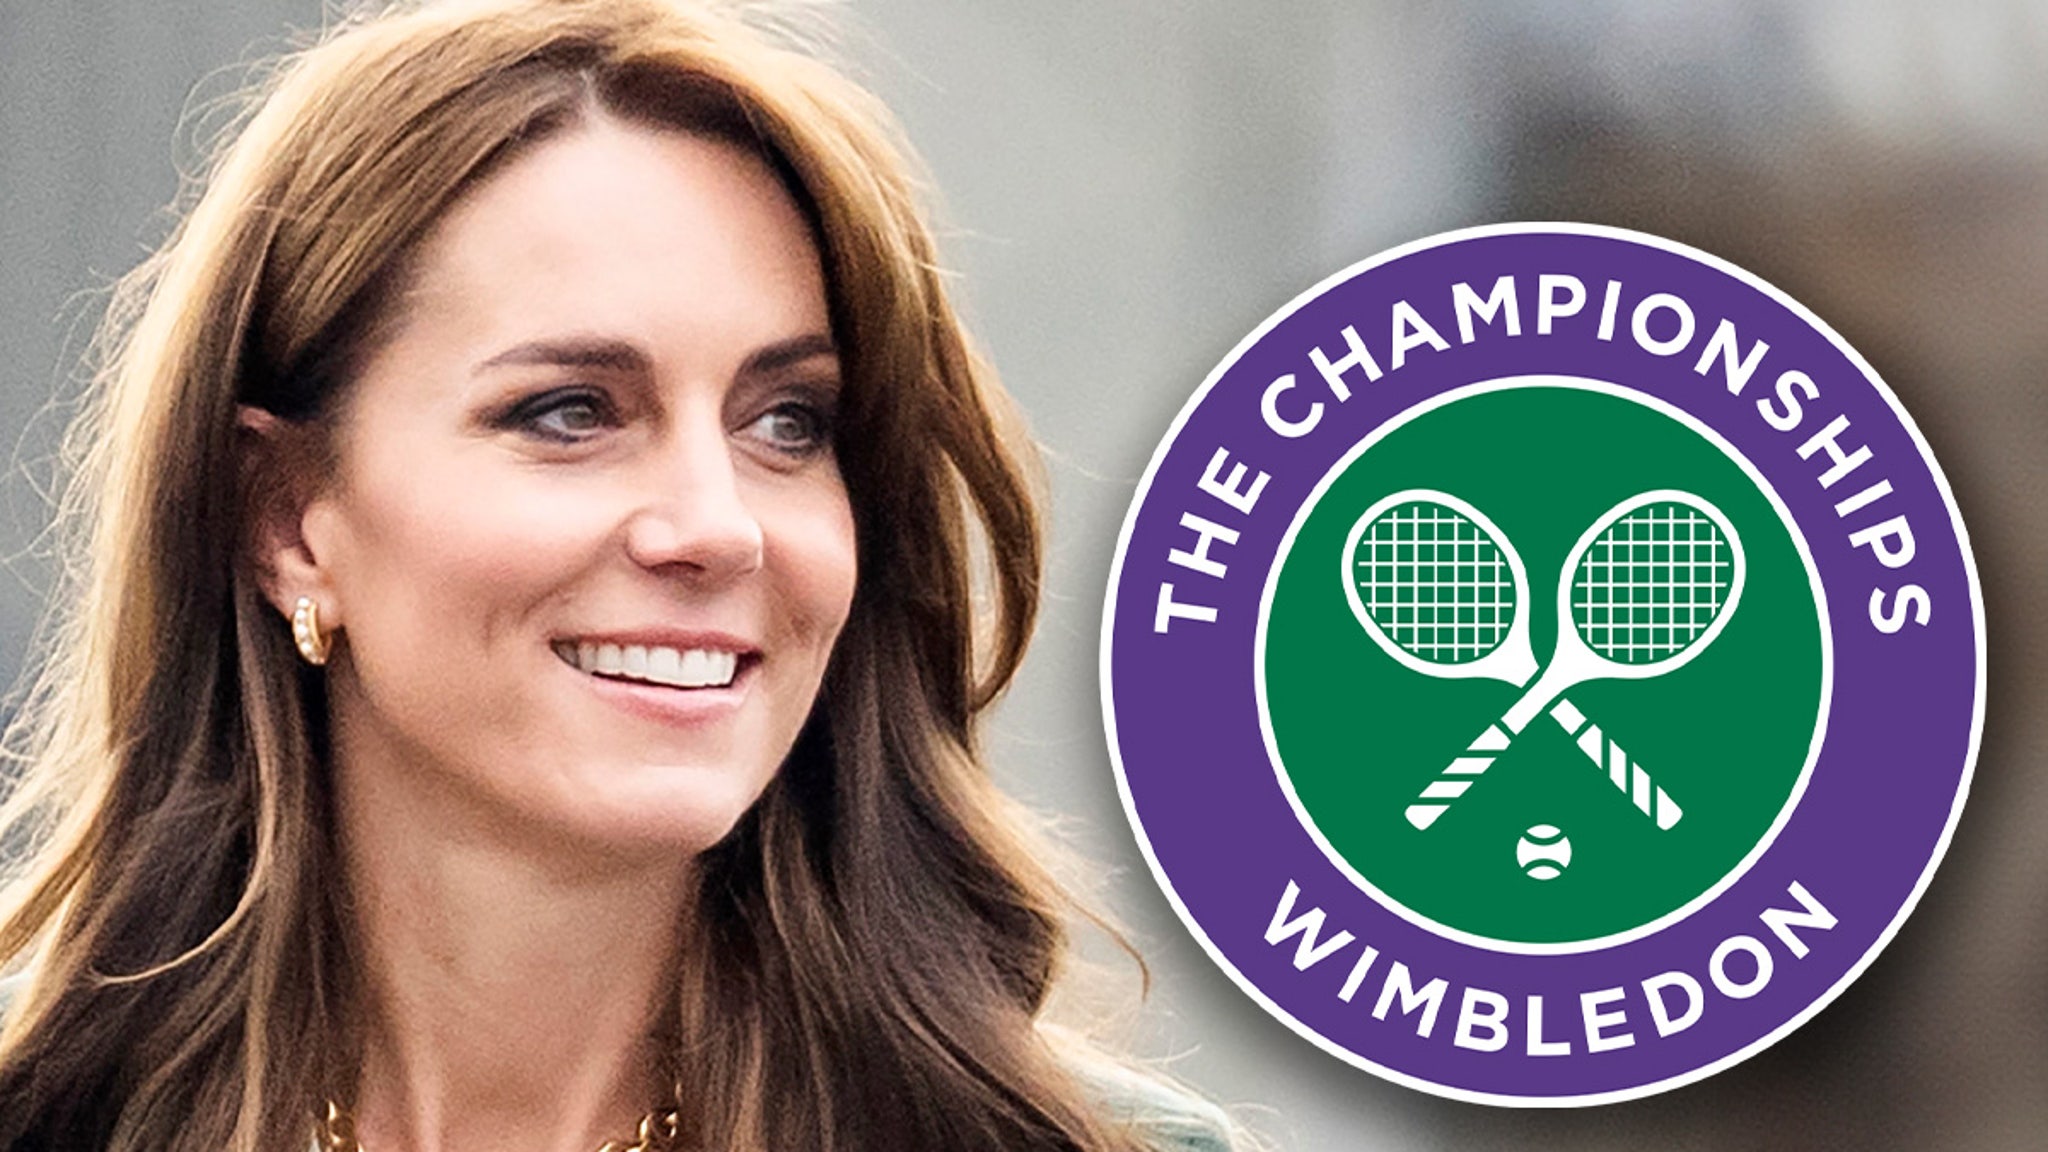 Kate Middleton to attend Wimbledon amid cancer battle